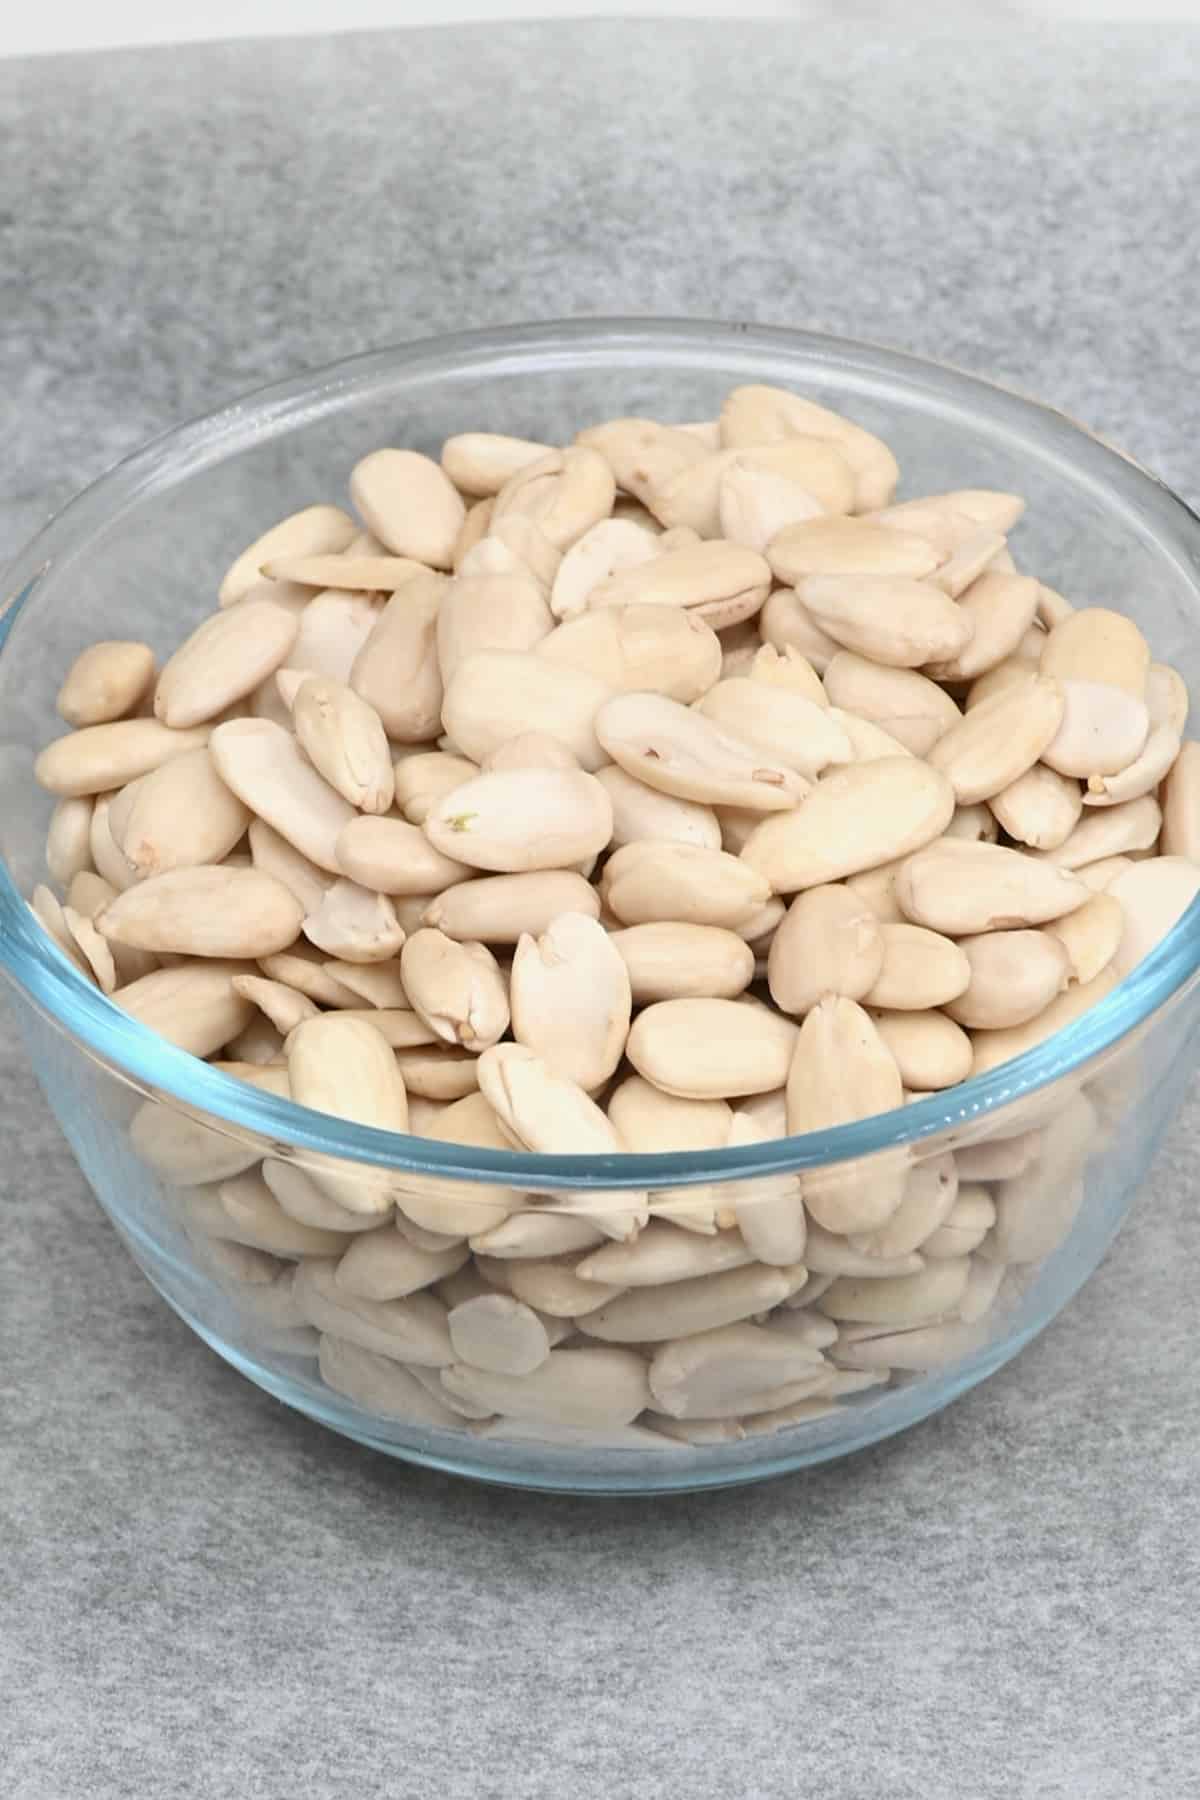 A bowl of blanched almonds